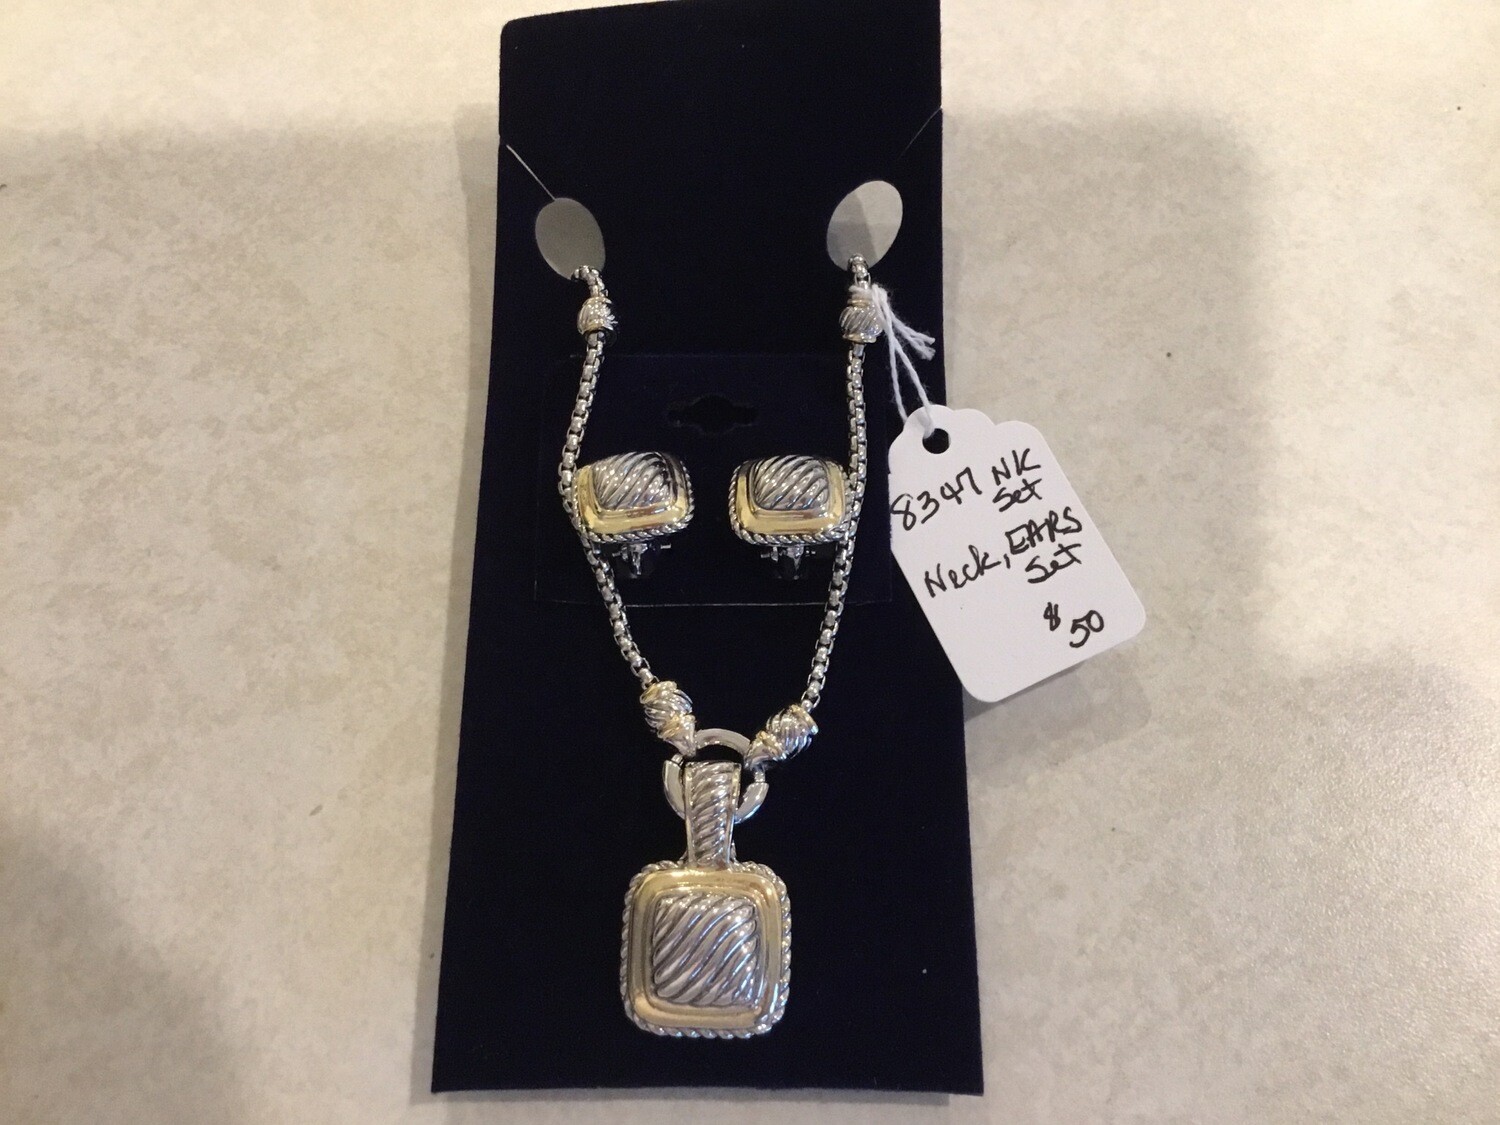 2-Tone Necklace And Earring Set With Square Pendant 17 In + 2